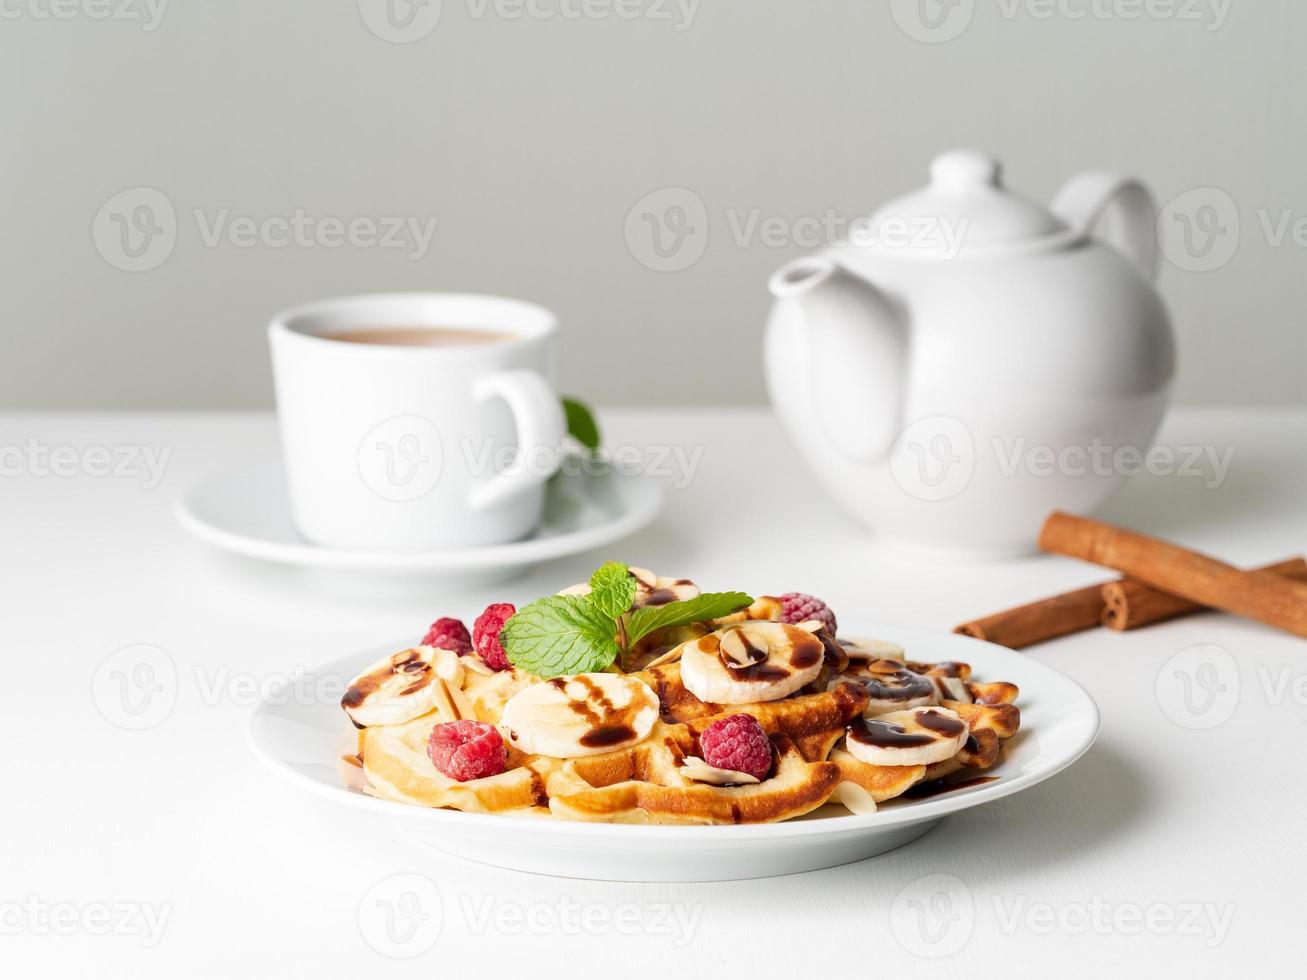 Belgian curd waffles with raspberries, banana, chocolate syrup. Breakfast with tea on white background, side view photo